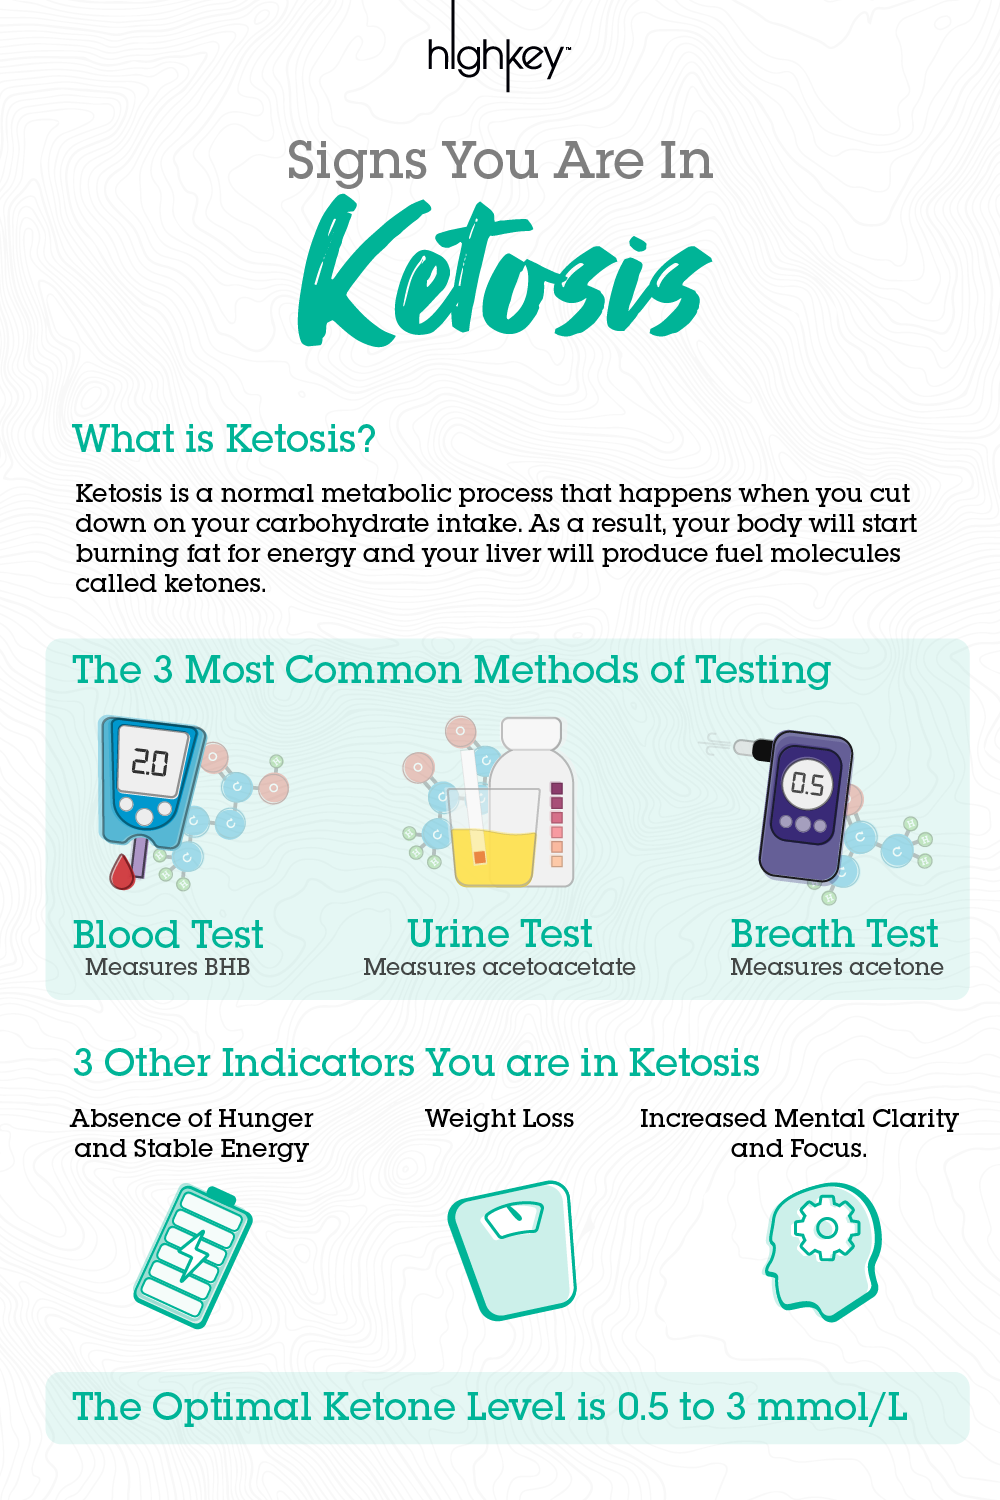 How Do You Know When You're In Ketosis? 6 Ways HighKey